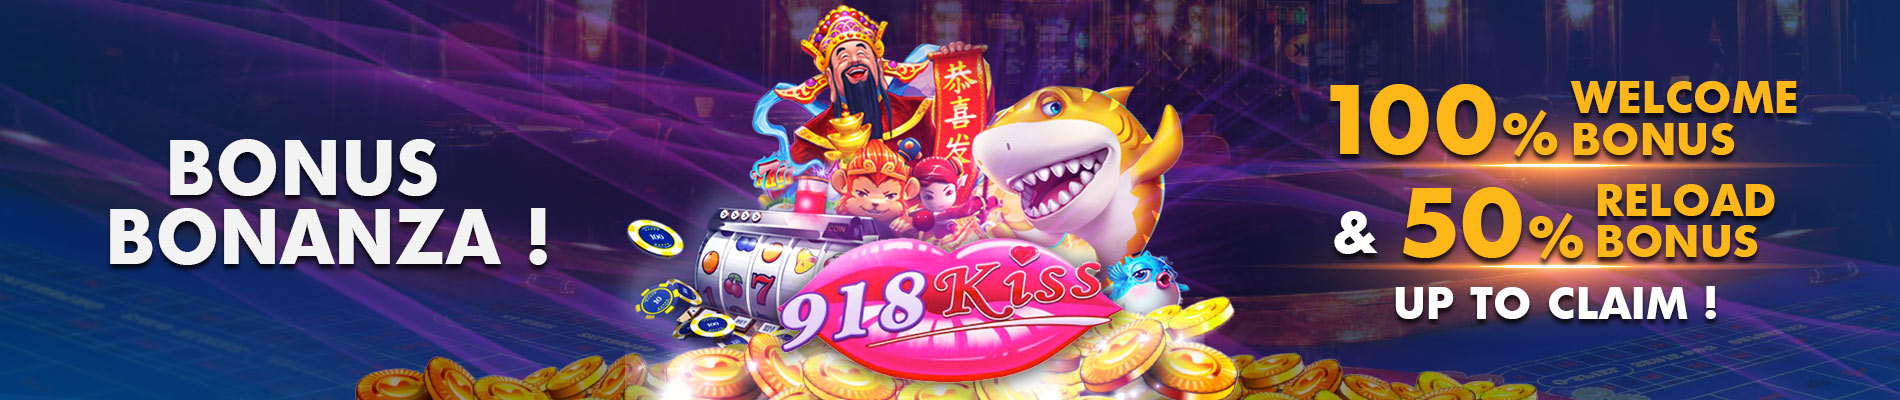 The Basic Facts of 918Kiss Online Casino